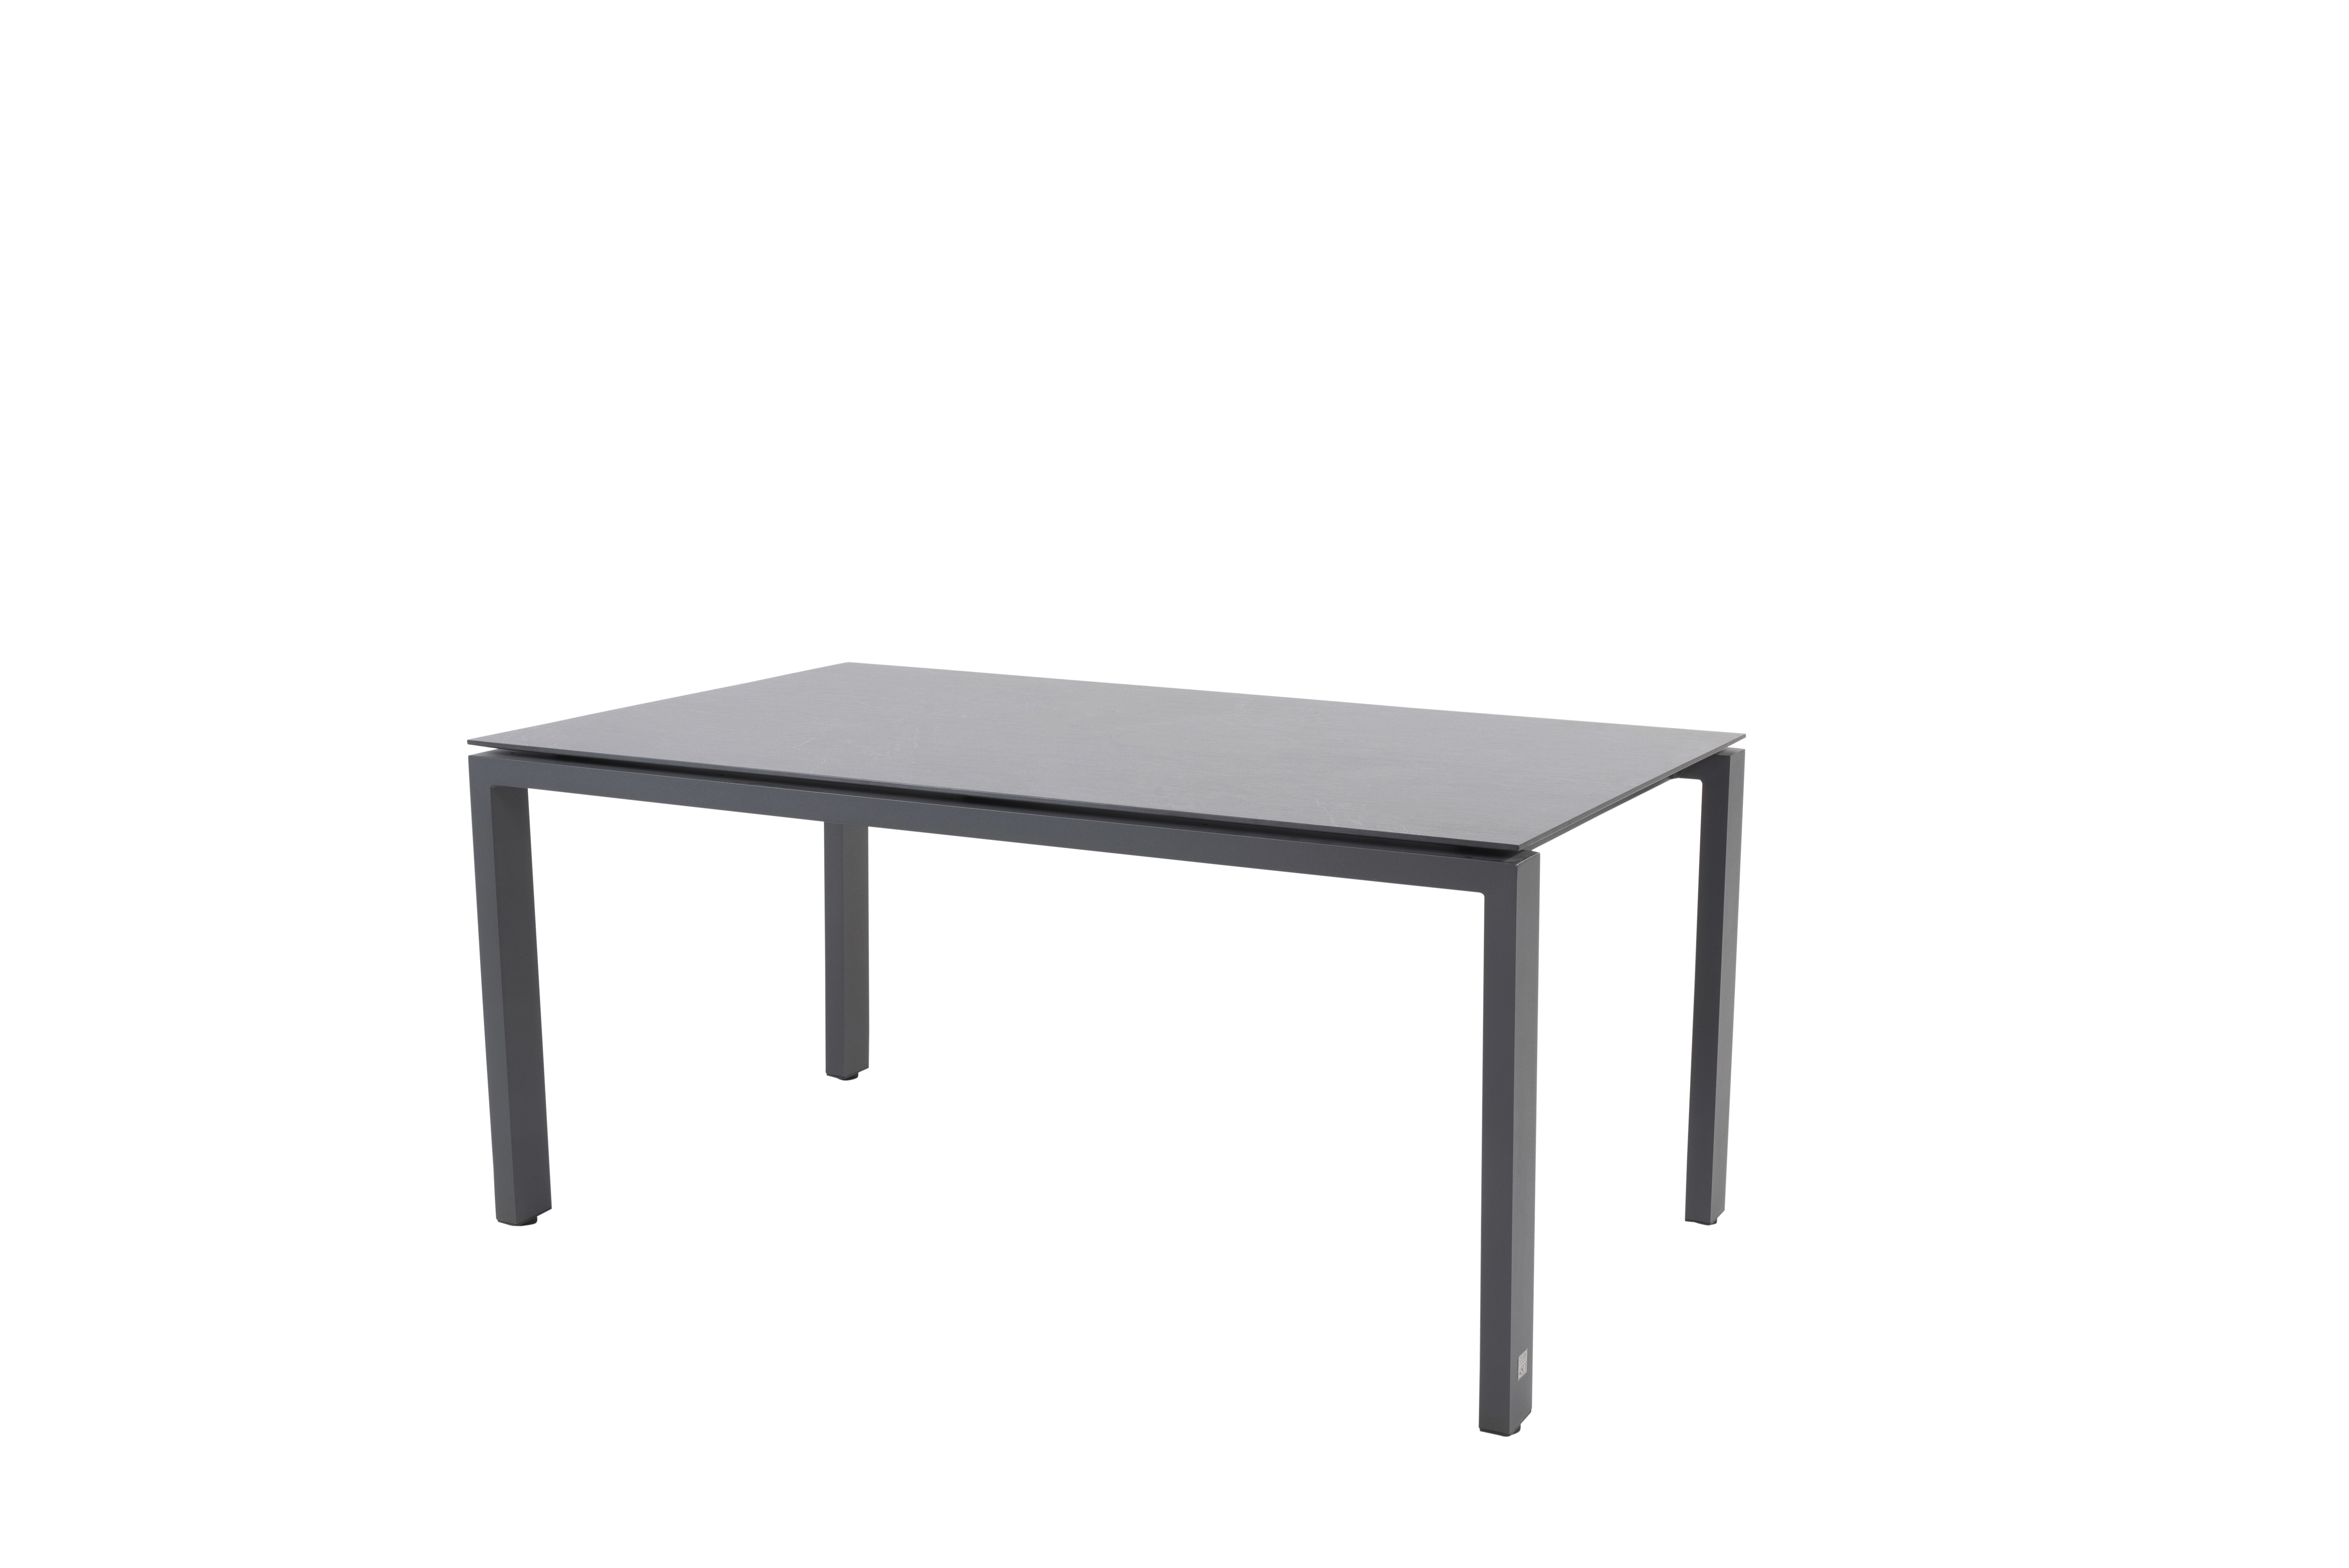 19609-19931_ Goa dining table 160x95cm with HPL Slate anthracite 01